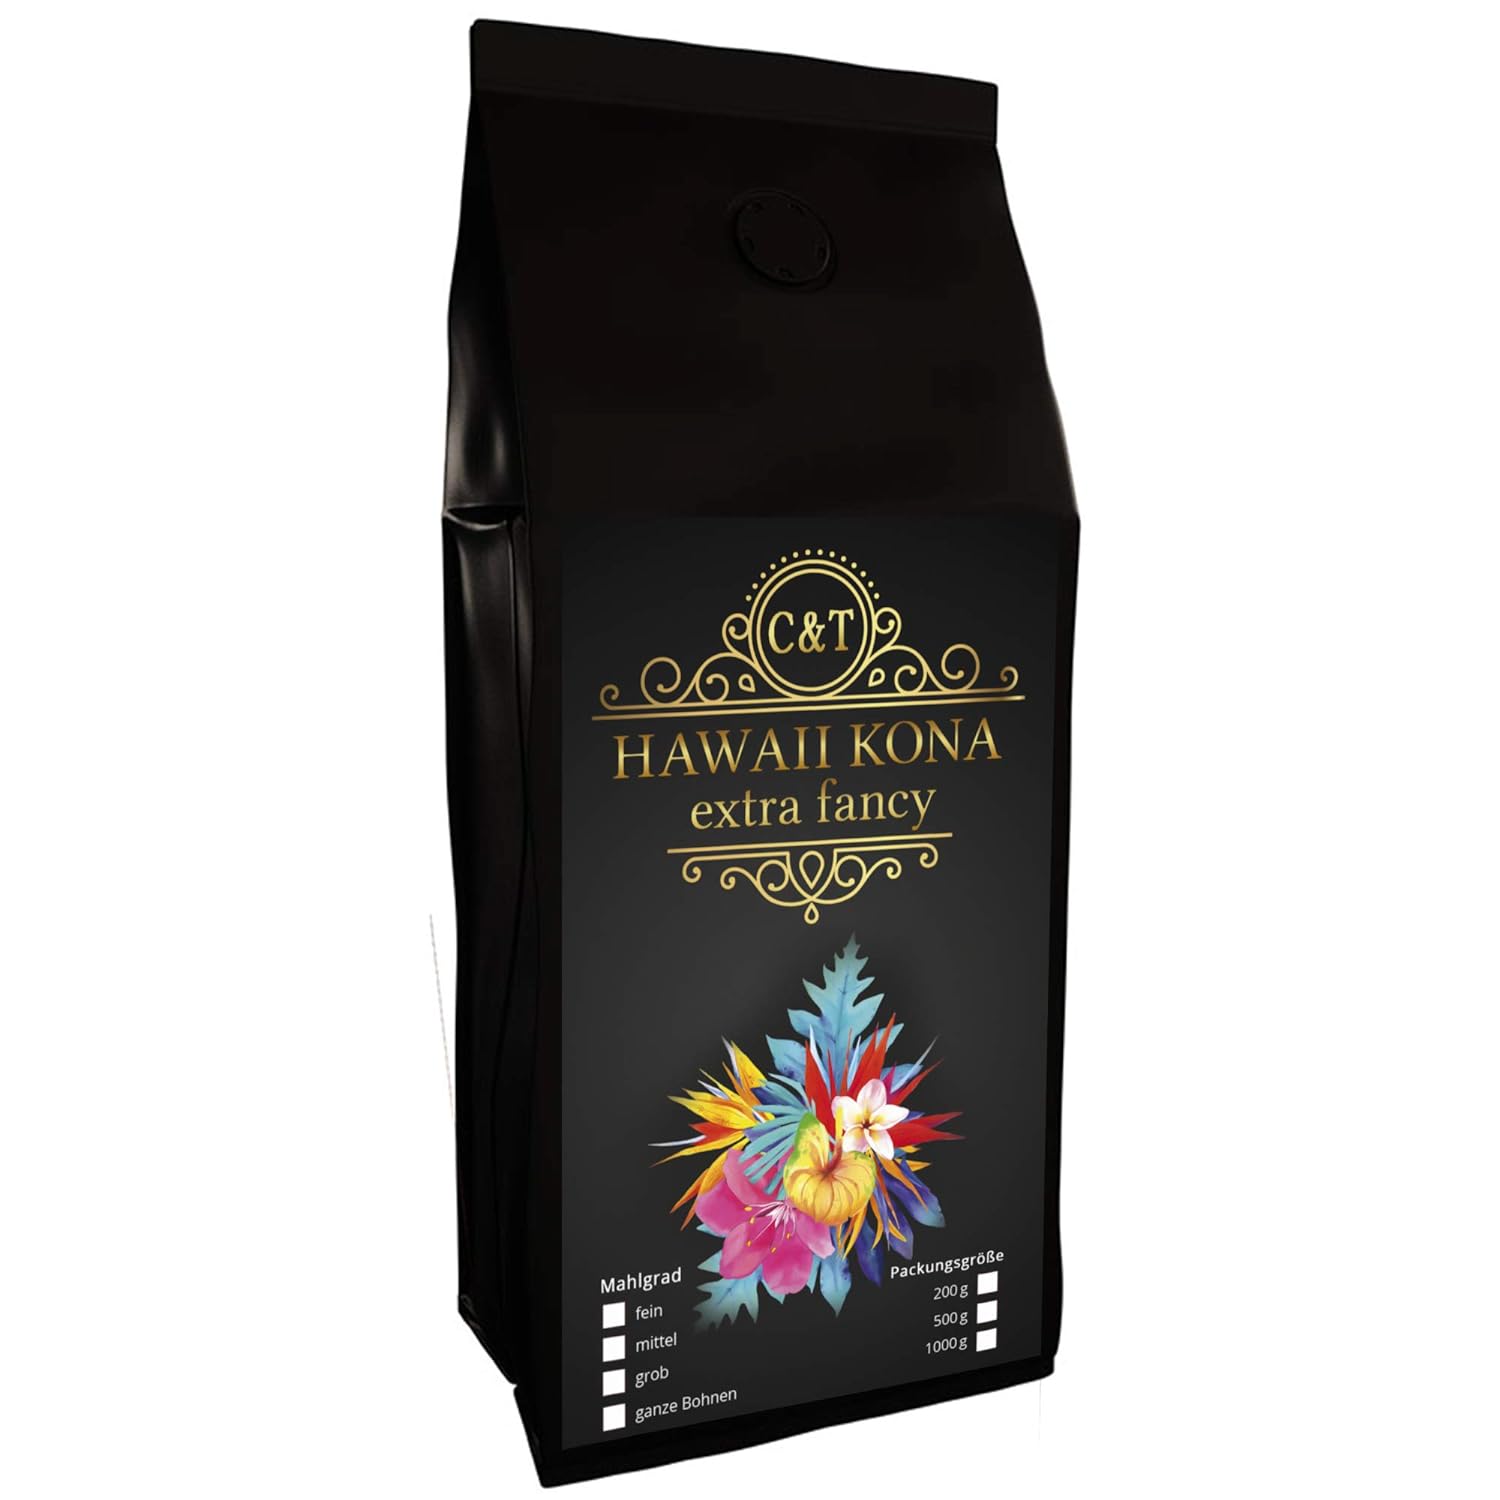 C&T Hawaii Kona coffee | 500g entire beans | The brown gold from Hawaii - one of the best coffees of the Wel